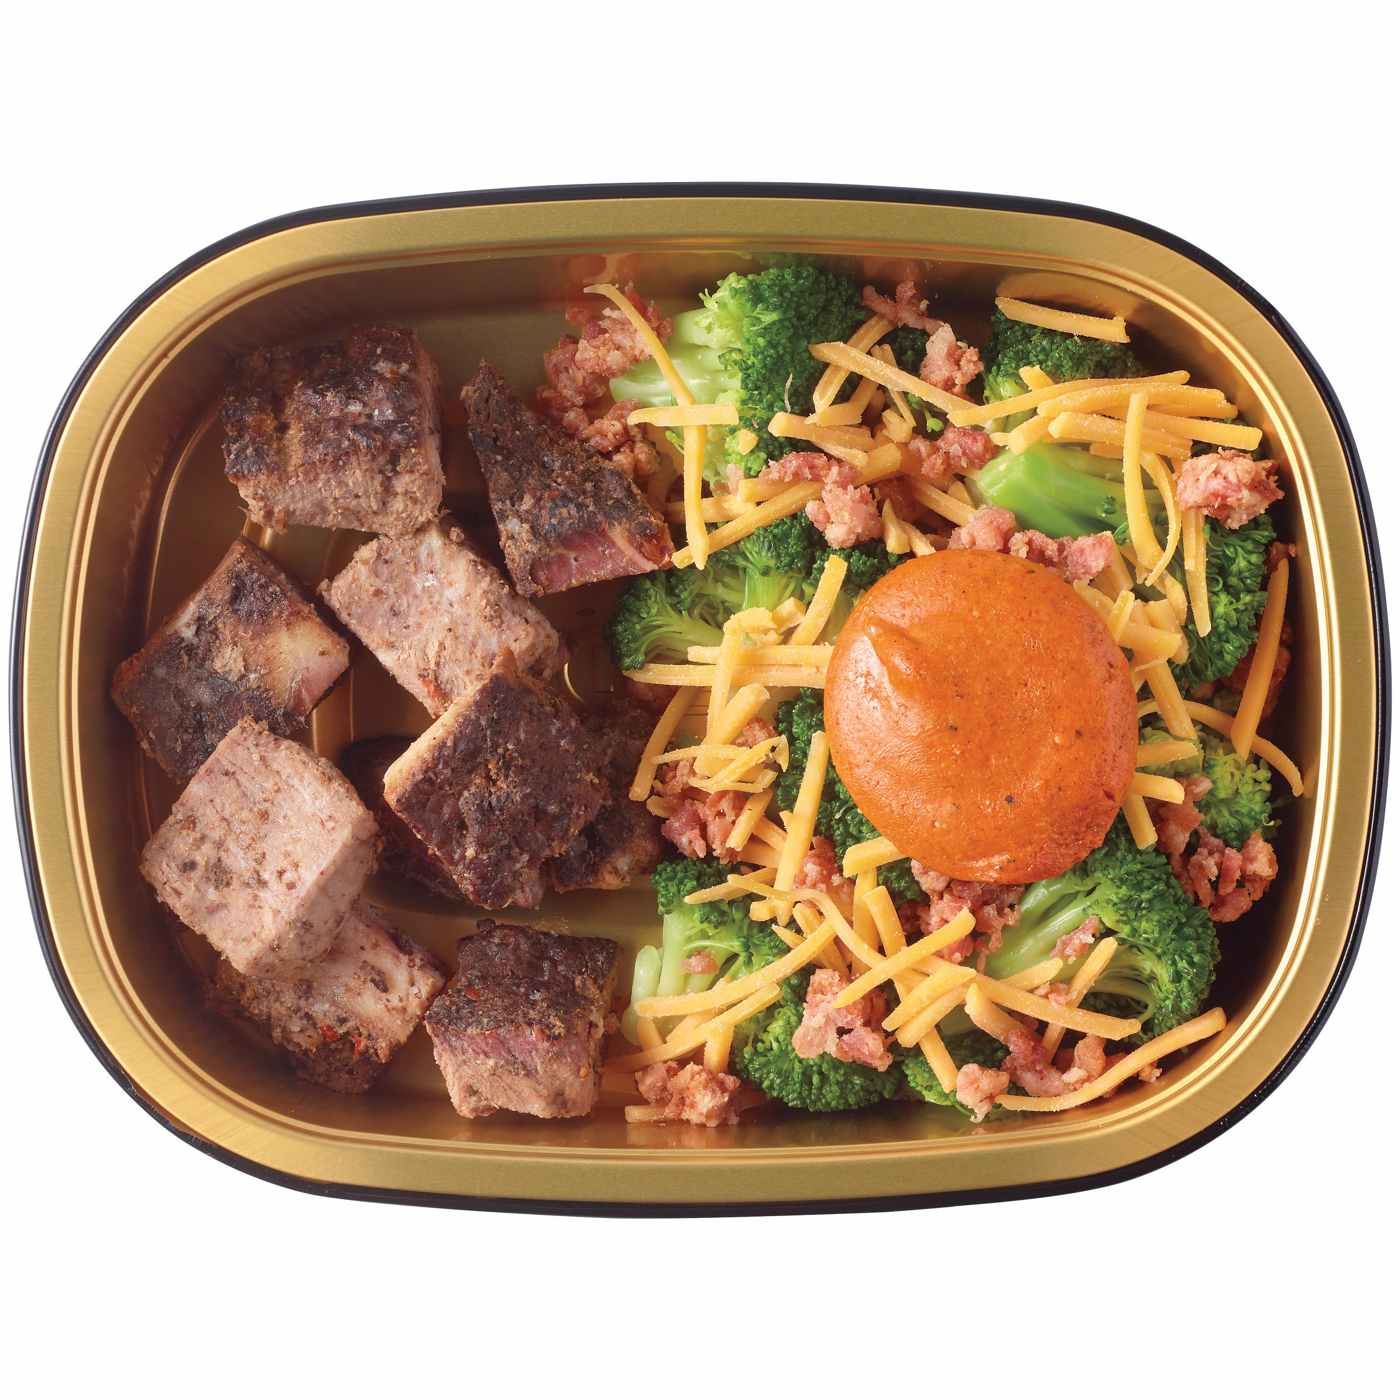 Meal Simple by H-E-B Low-Carb Lifestyle Beef Brisket Burnt Ends & Broccoli; image 1 of 3